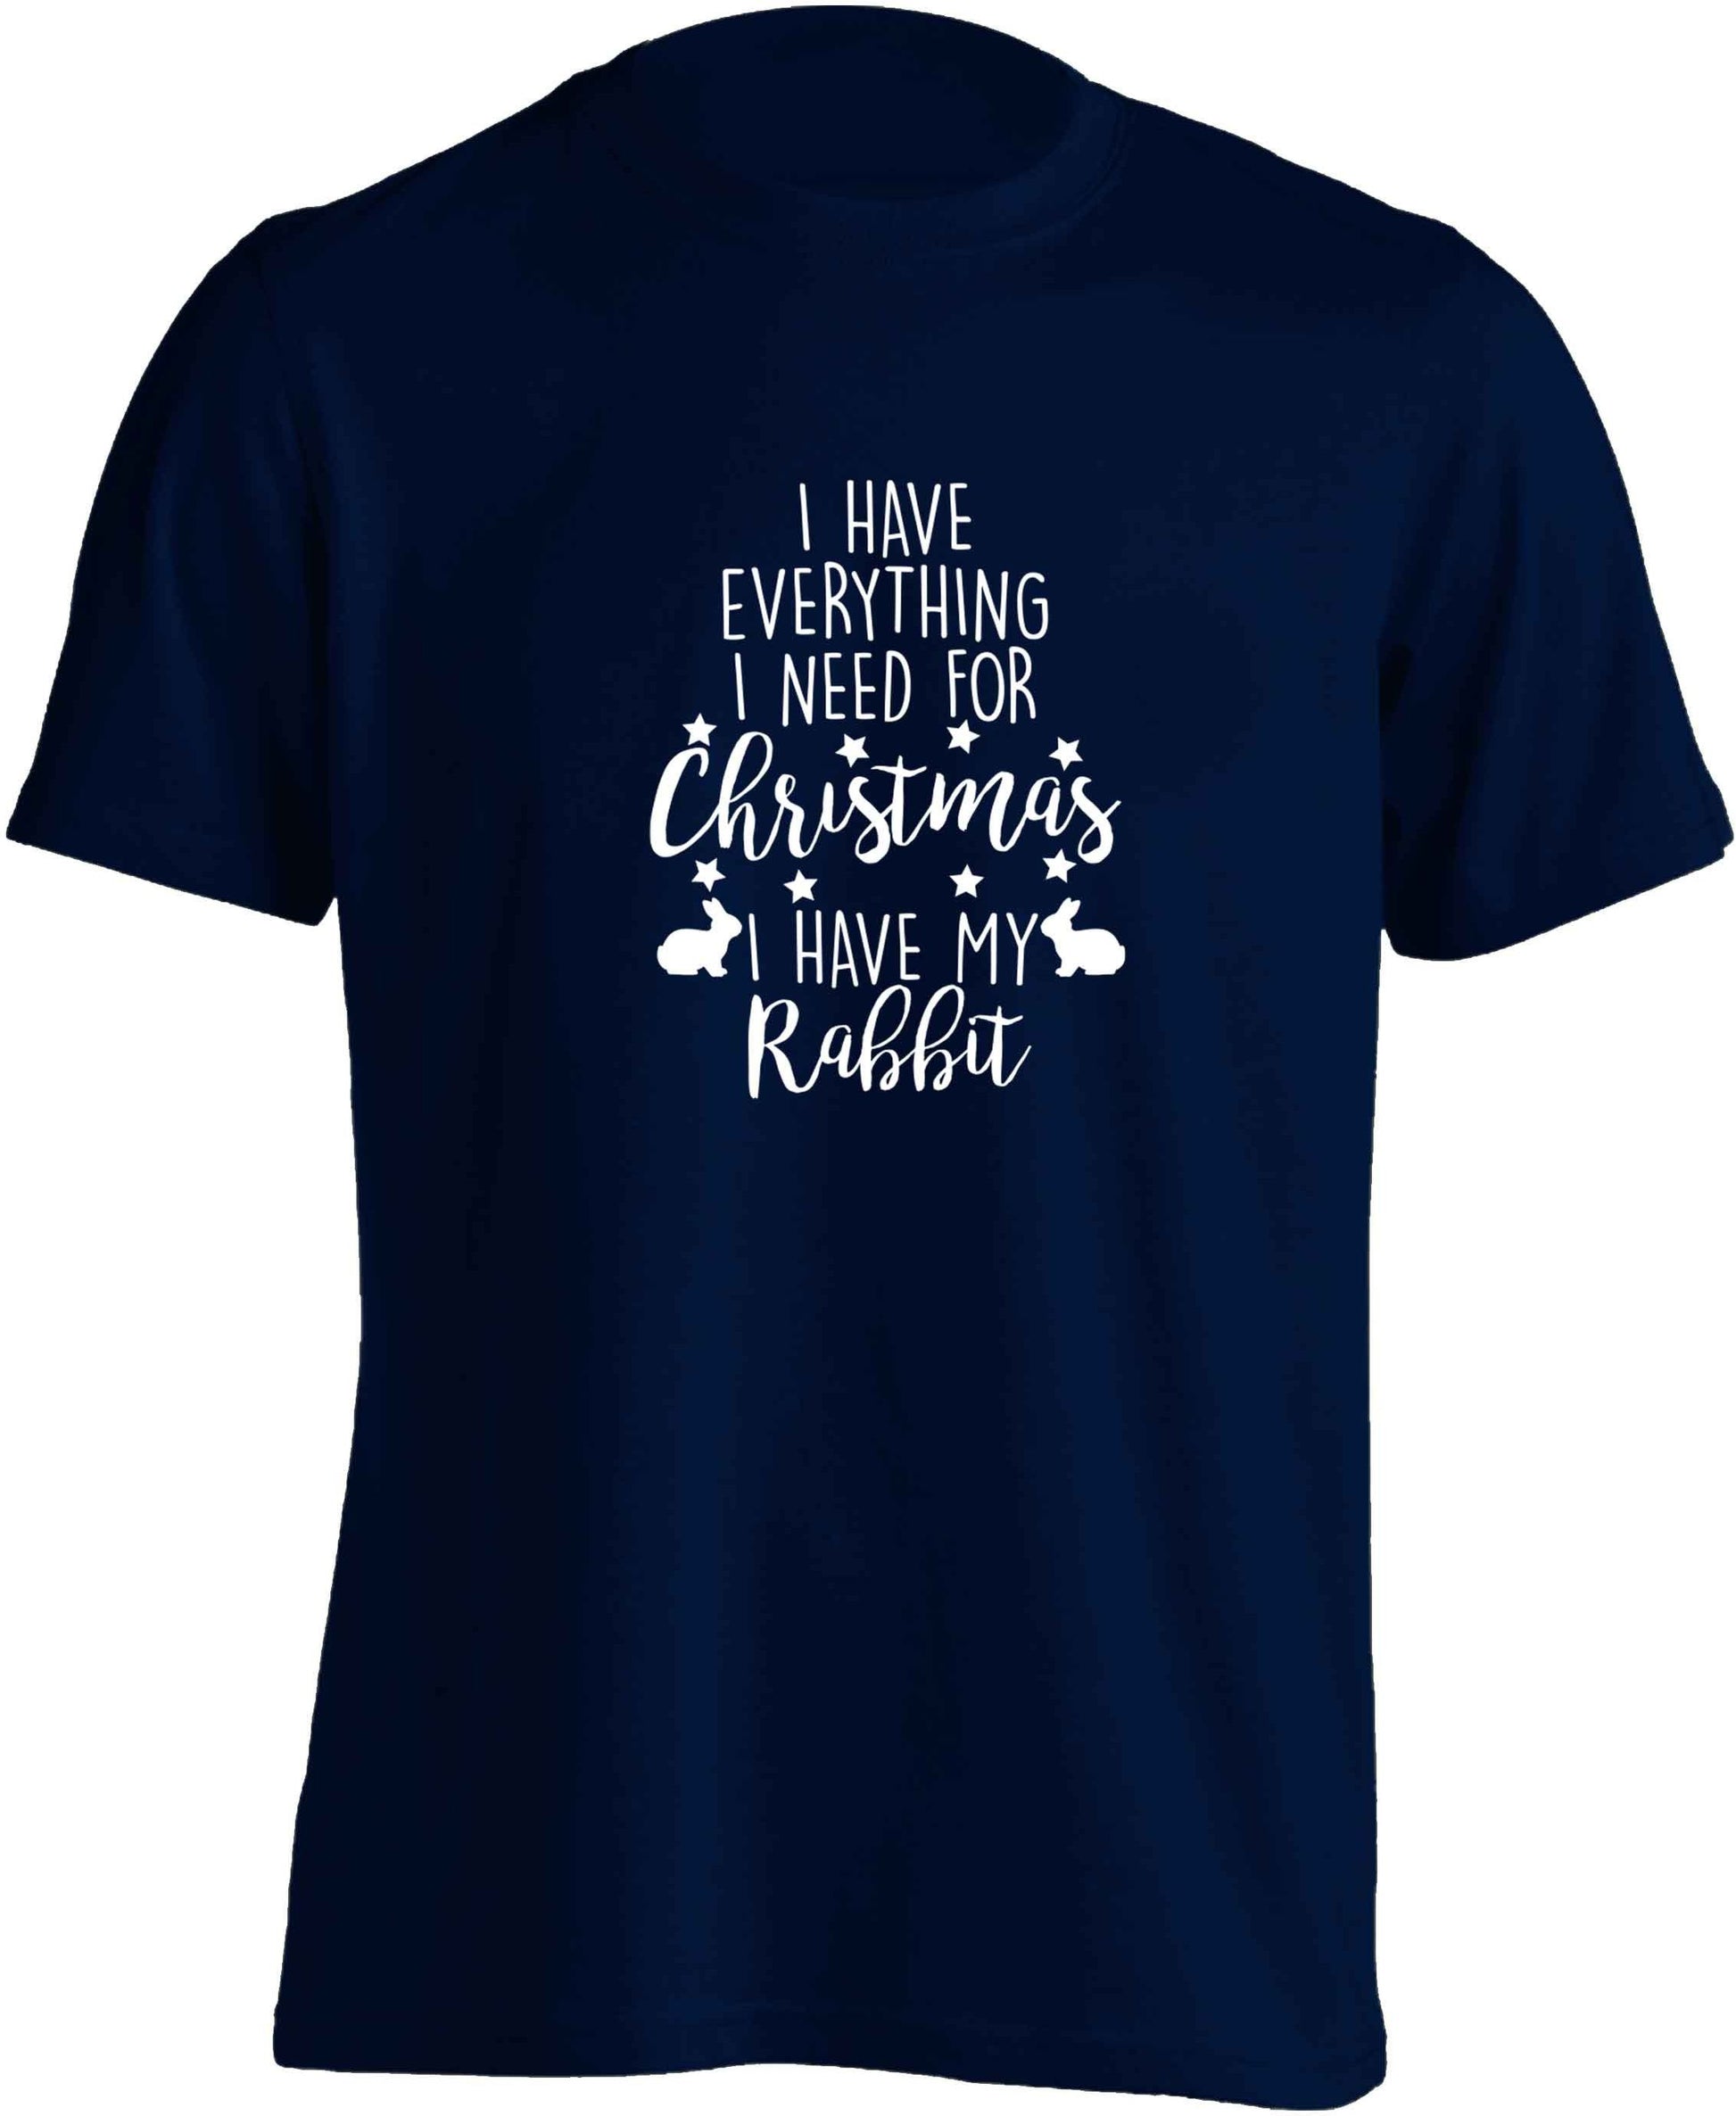 I have everything I need for Christmas I have my rabbit adults unisex navy Tshirt 2XL